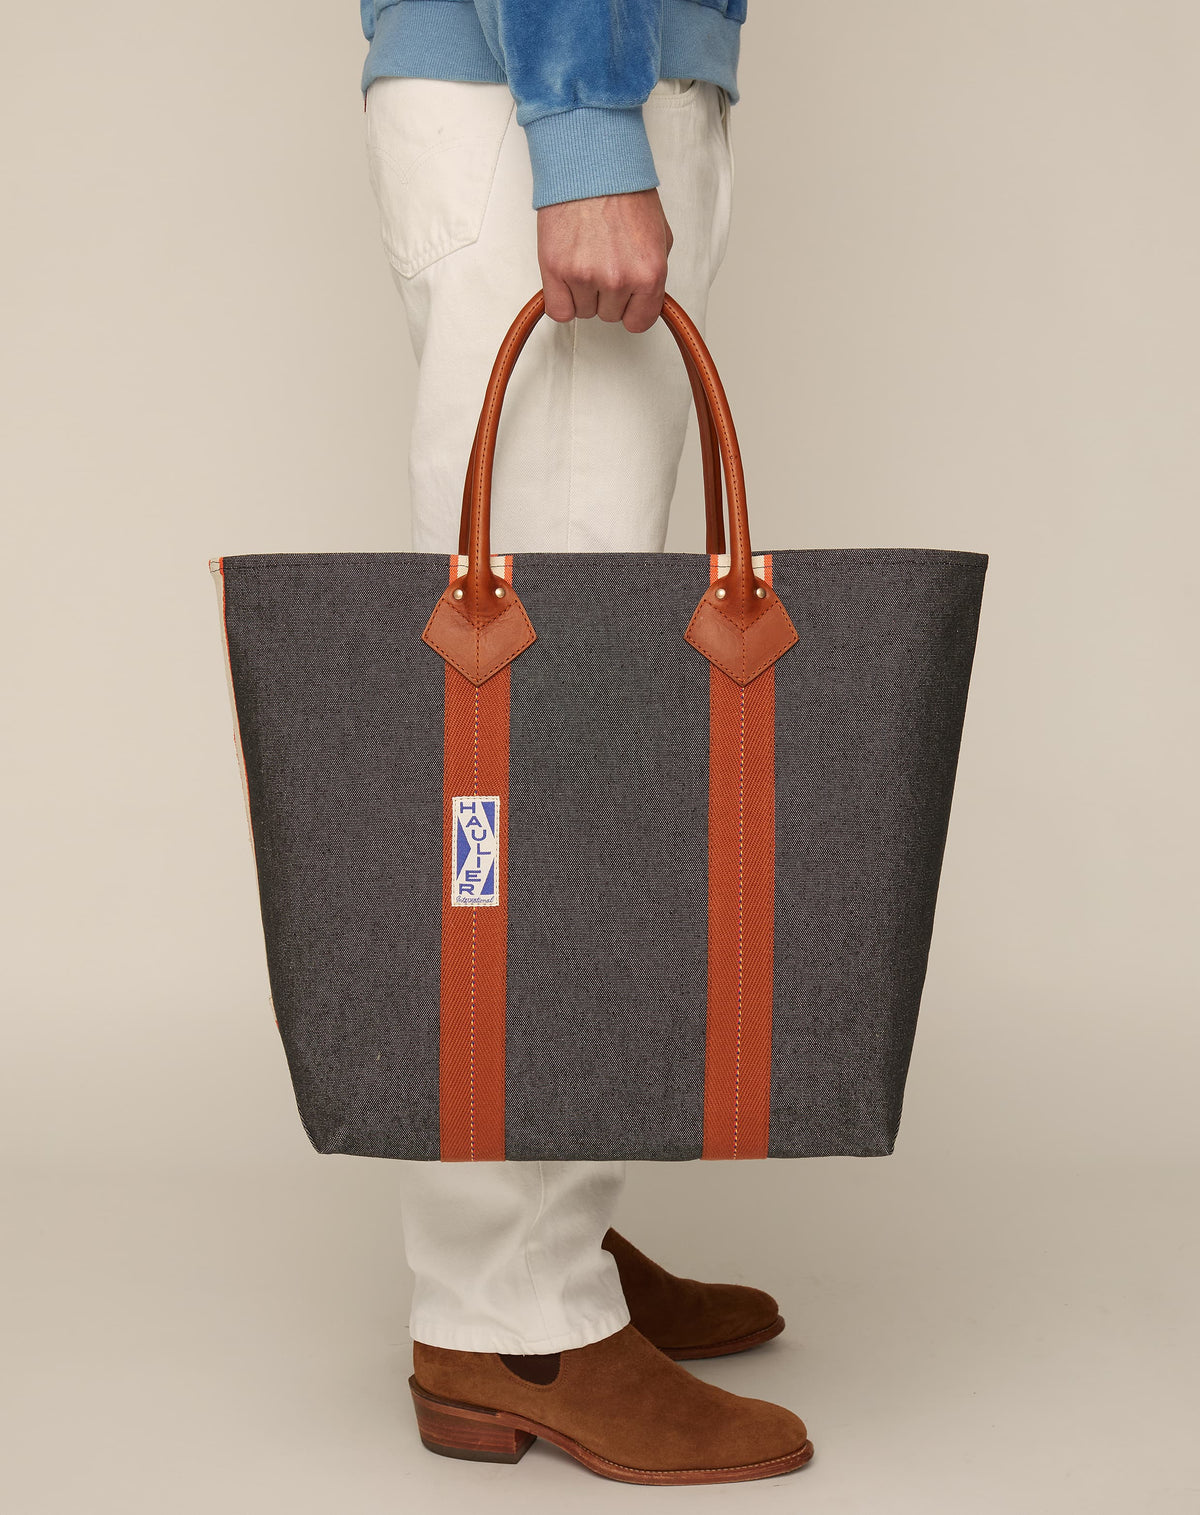 Image of person in white trousers and tan boots holding a medium-sized classic canvas tote bag in washed black colour with tan leather handles and contrasting stripes.